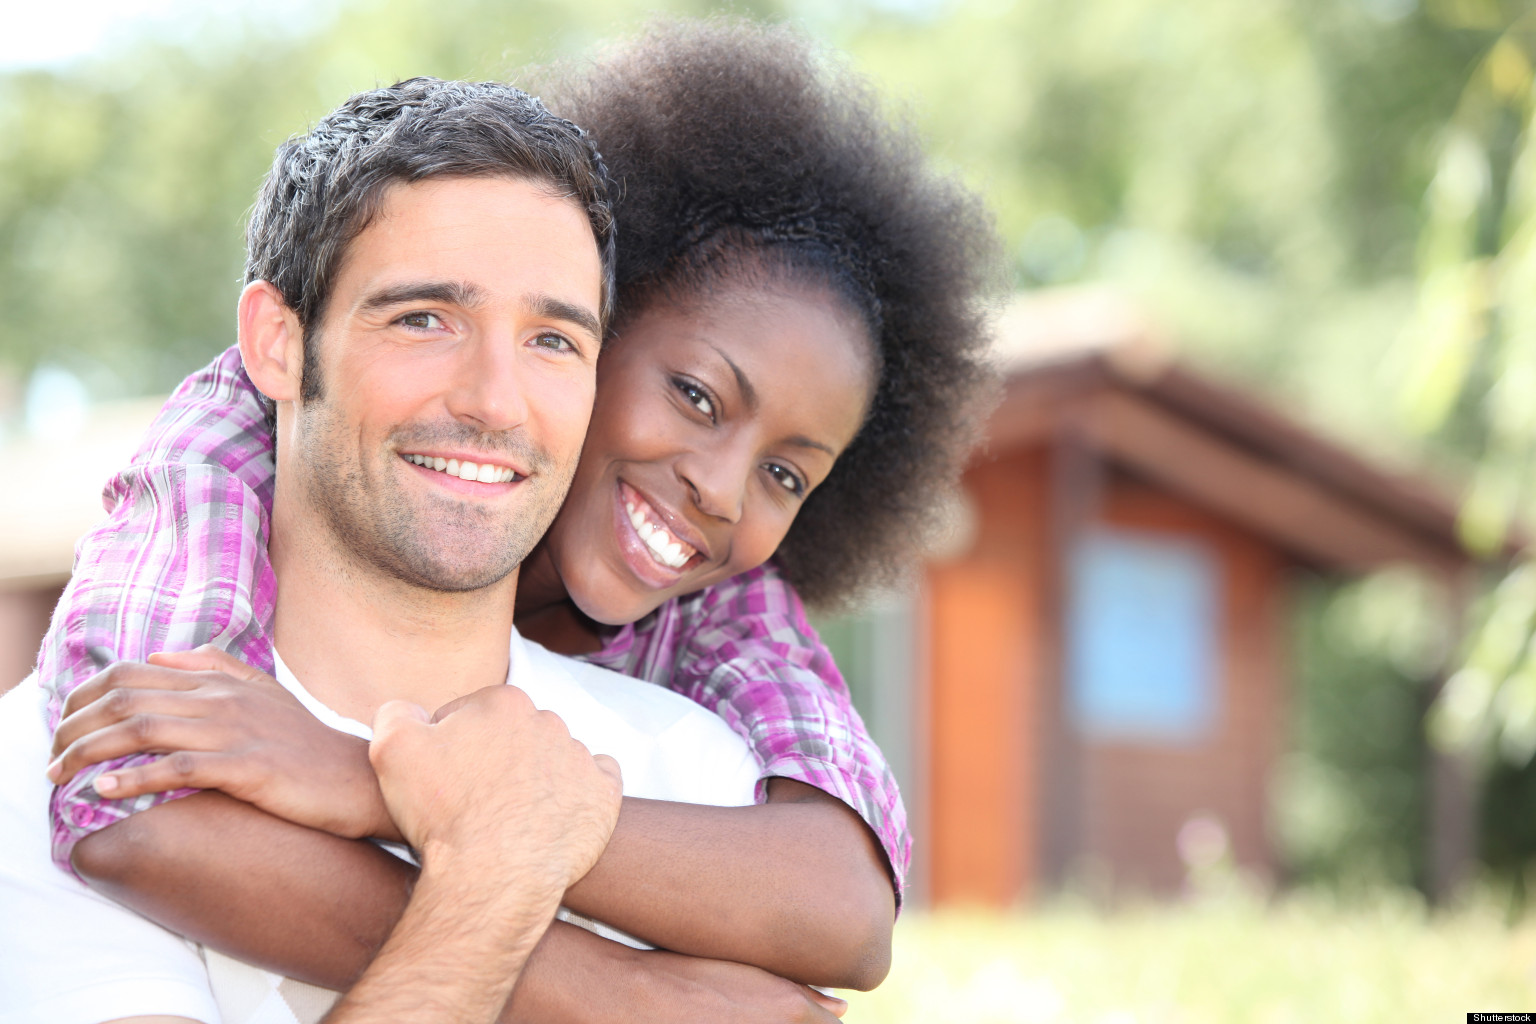 30 Interracial Couples Show Why Their Love Matters | HuffPost